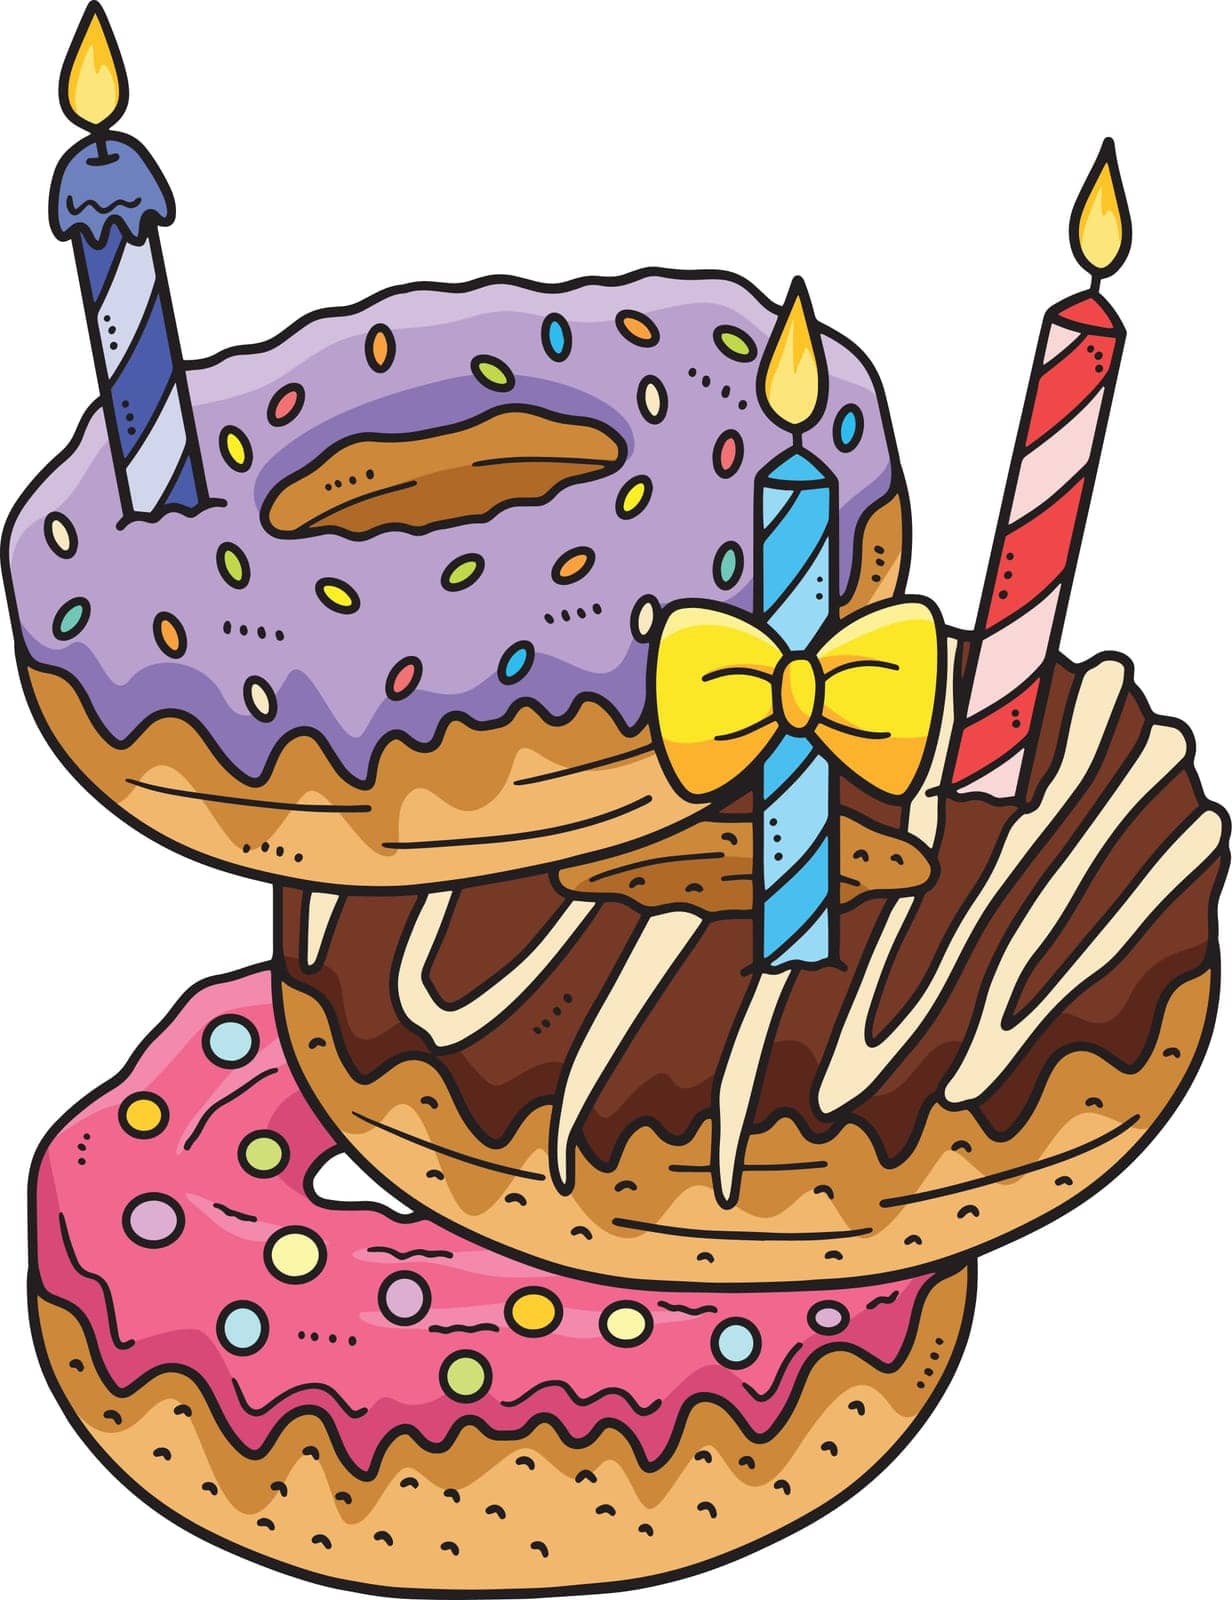 This cartoon clipart shows a Birthday Stack of Donuts with Candle illustration.